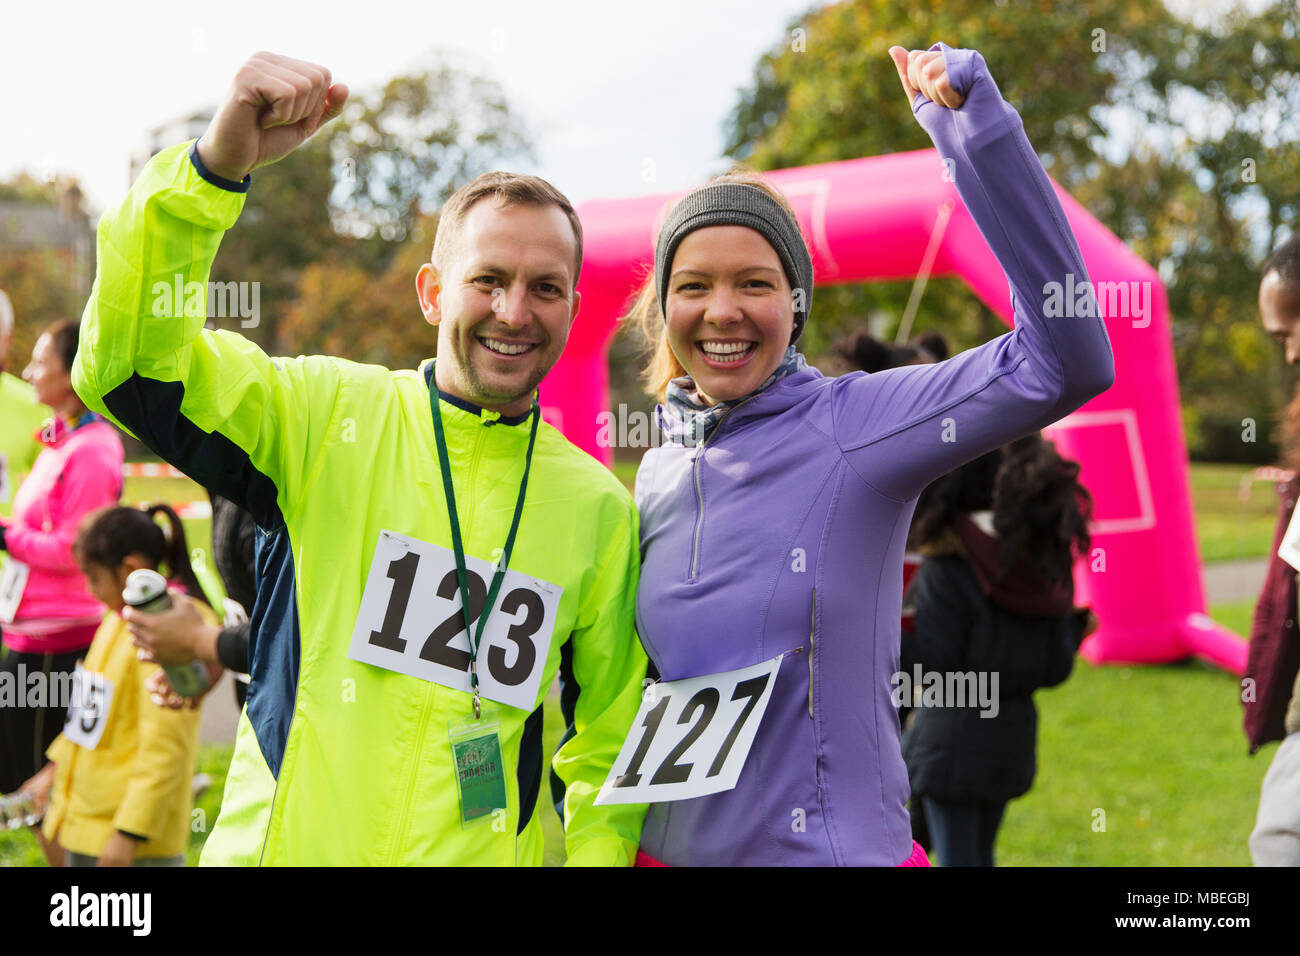 Enthusiastic runner couple cheering at charity run in park Stock Photo